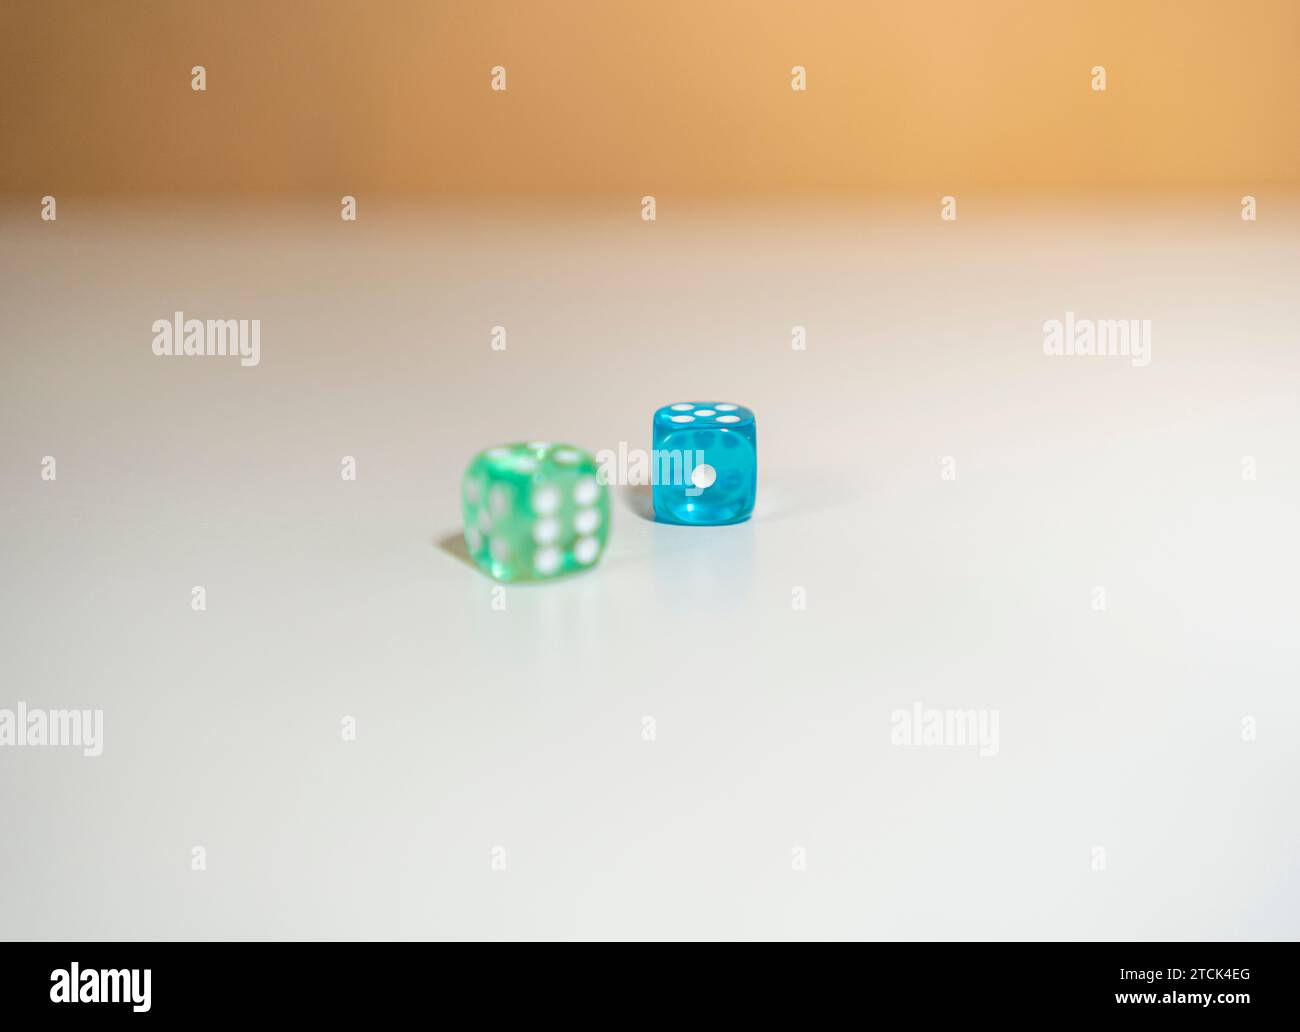 Blue and green dice only one in focus Stock Photo